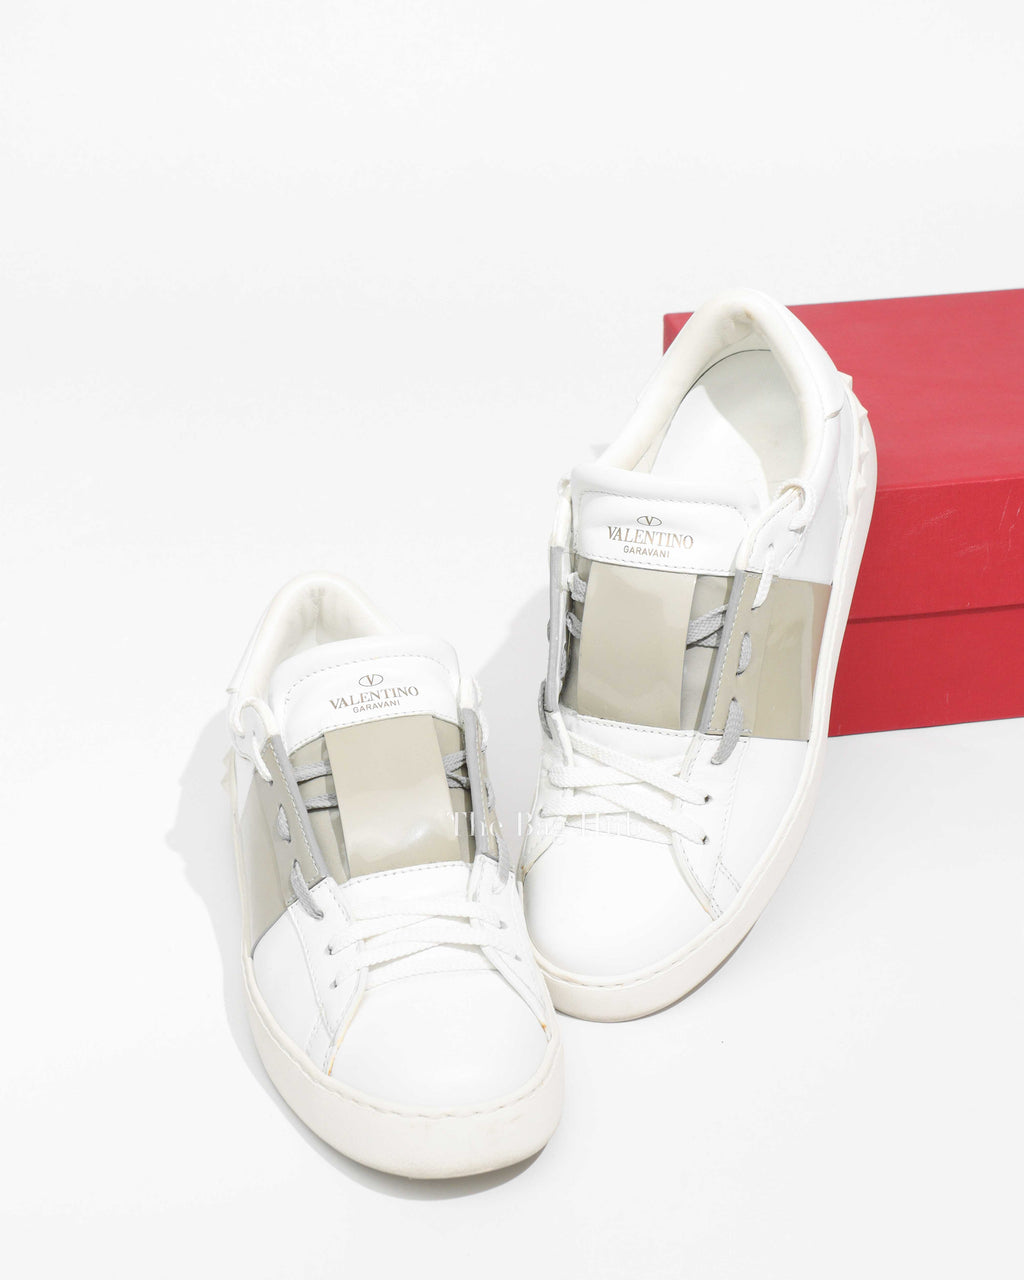 Valentino Garavani White/Light Green Patent Leather Band Open Low Top Sneakers Size 38-1